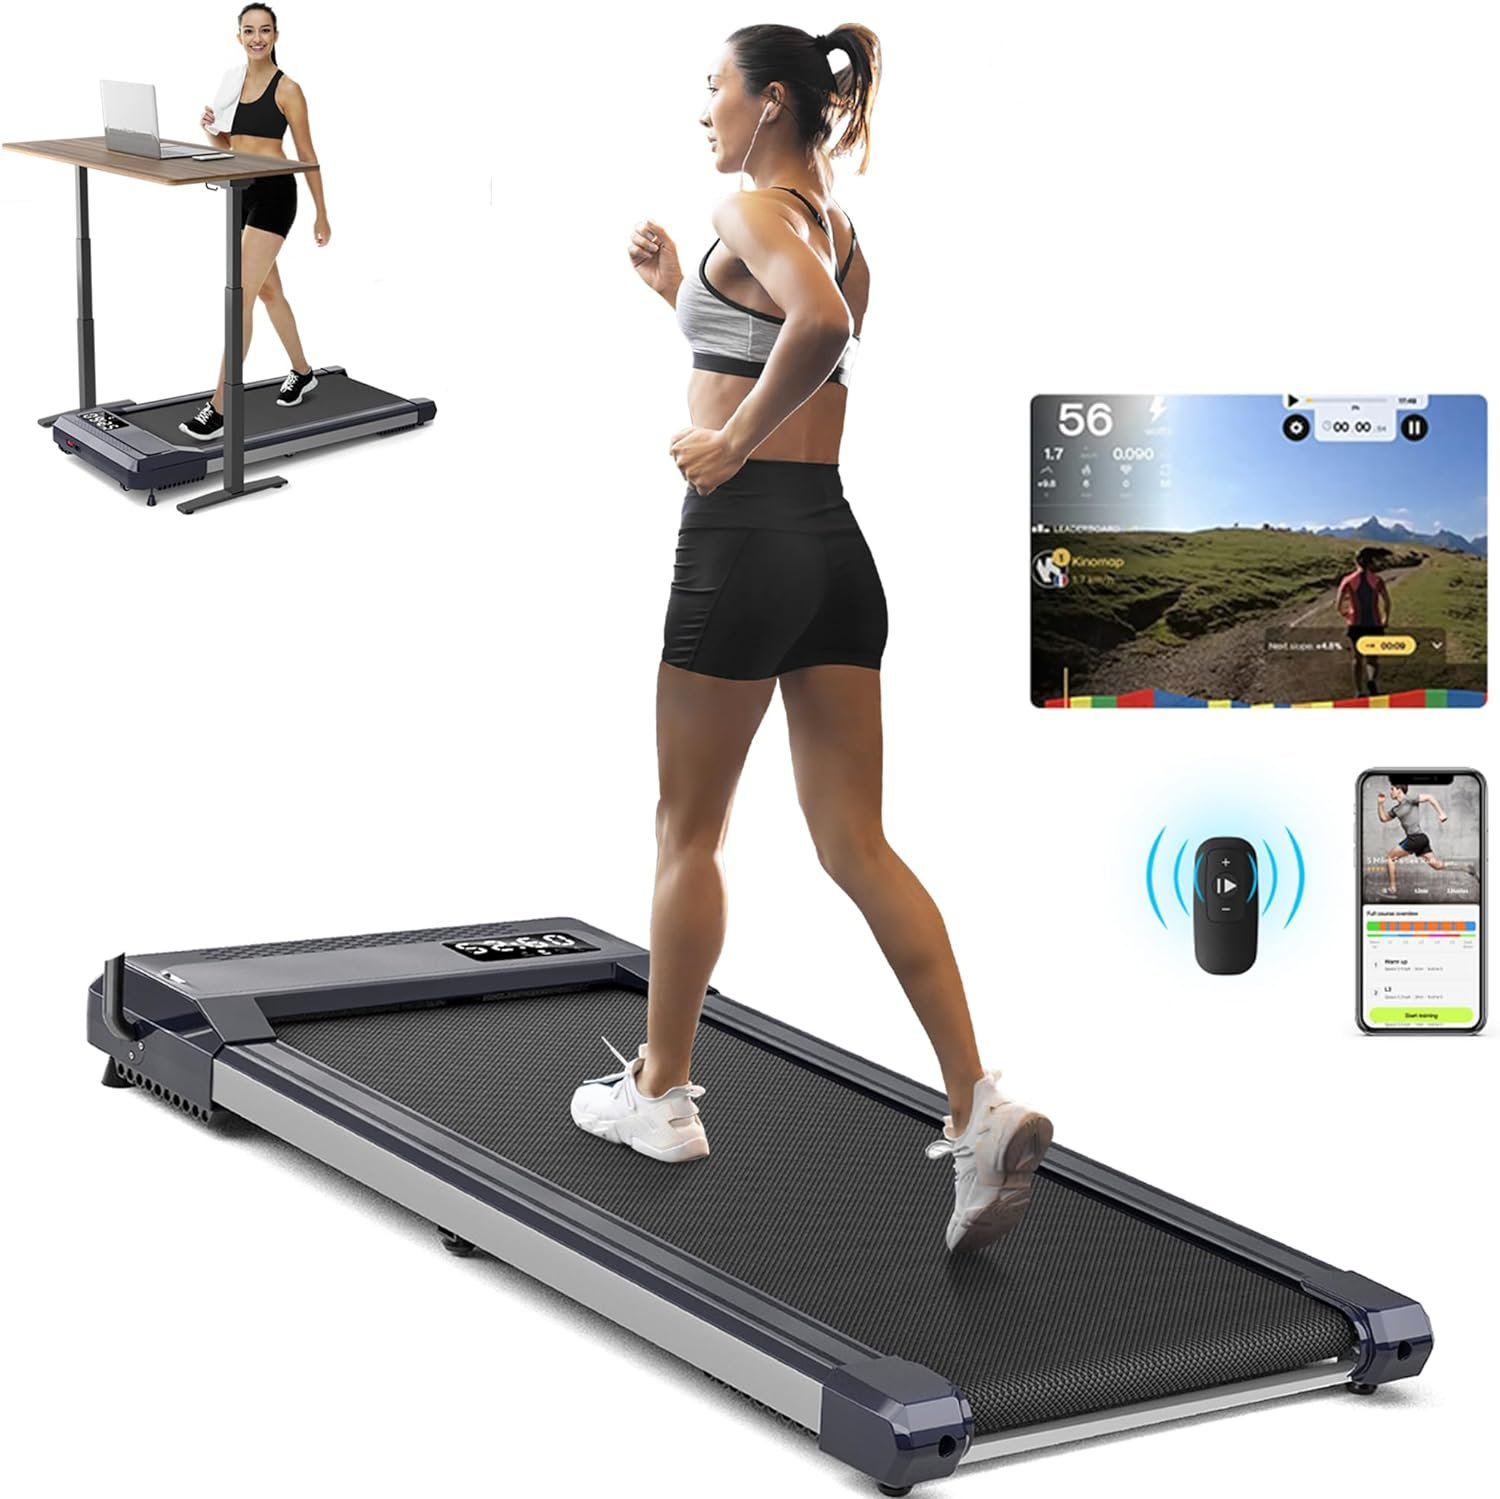 Wellfit Treadmill with Incline